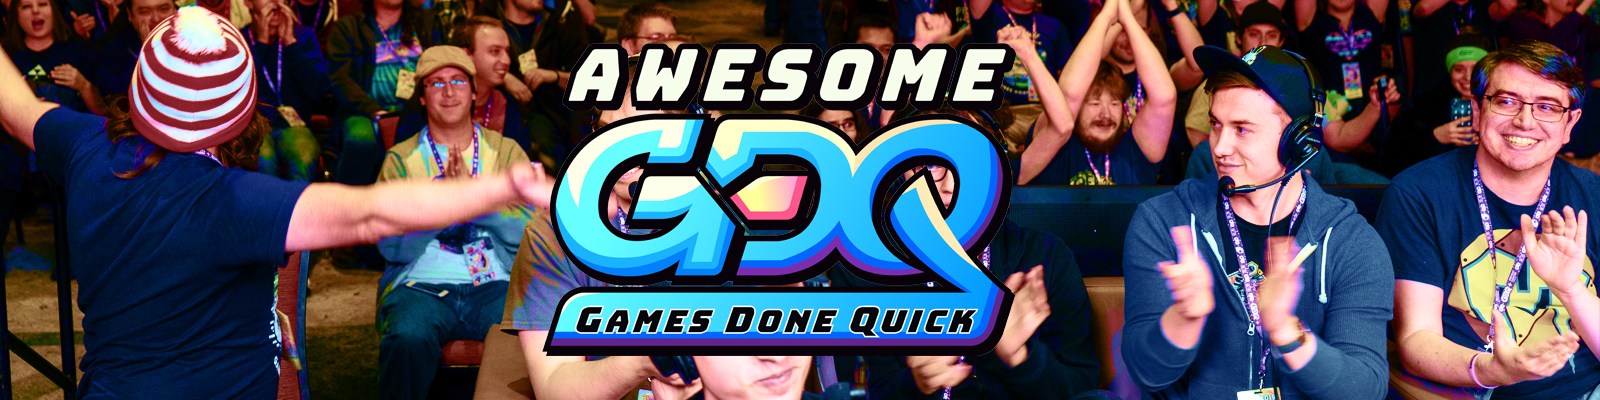 Games Done Quick Has Found The Secret To Hosting A Successful Charity Stream: Speedrunning